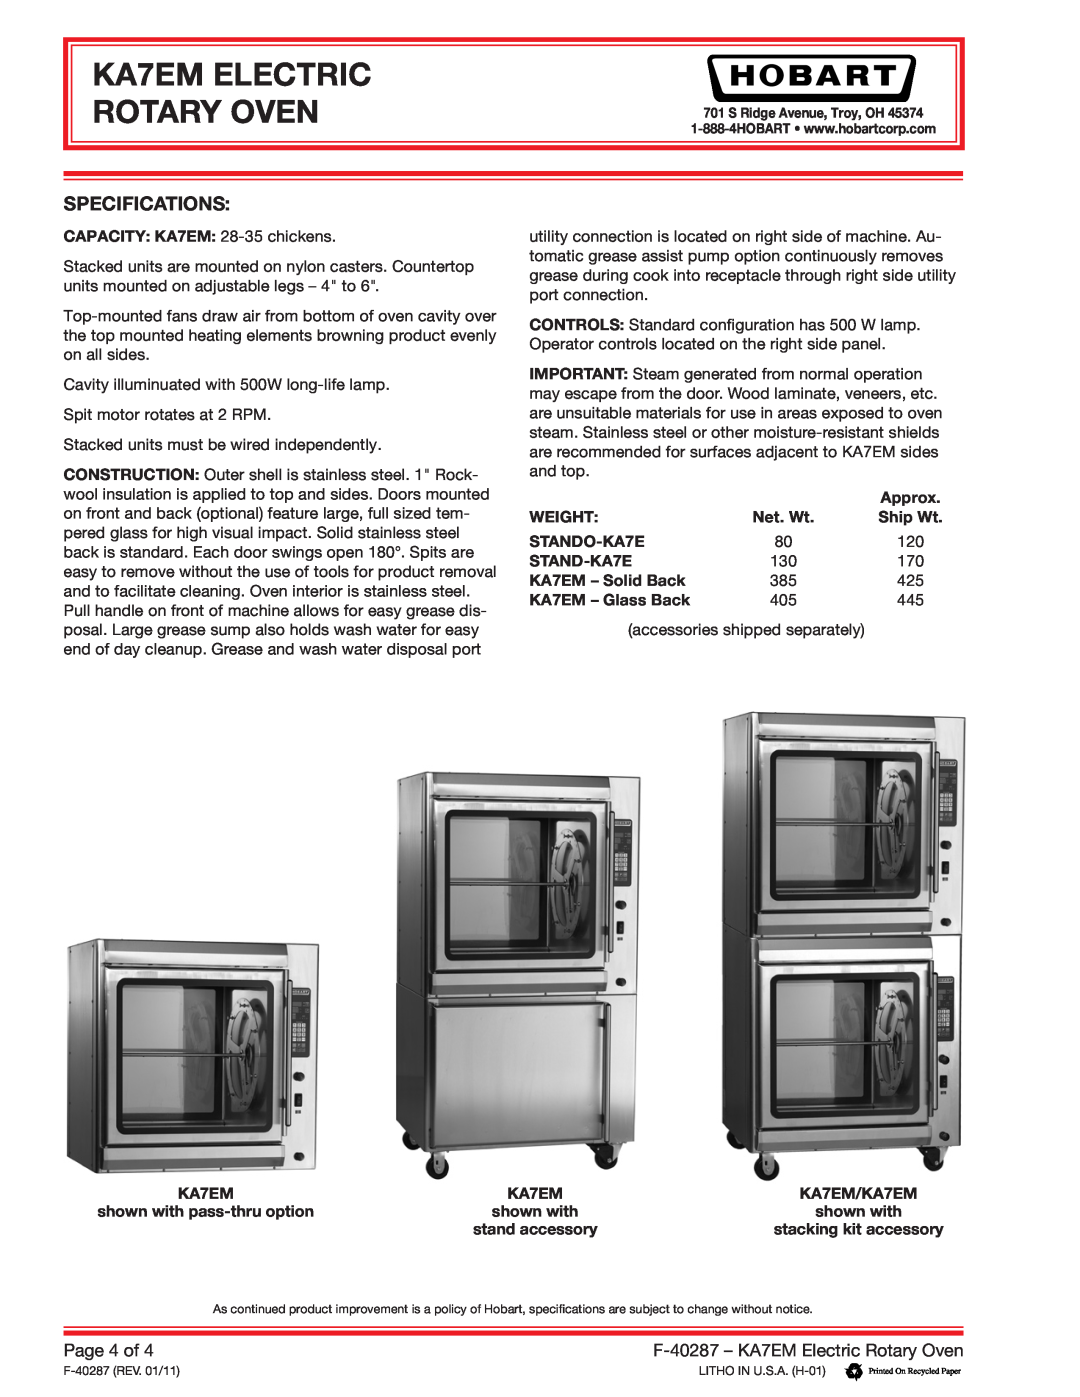 Hobart Specifications, KA7EM ELECTRIC ROTARY OVEN, CAPACITY KA7EM 28-35chickens, Approx, Weight, Net. Wt, Ship Wt 